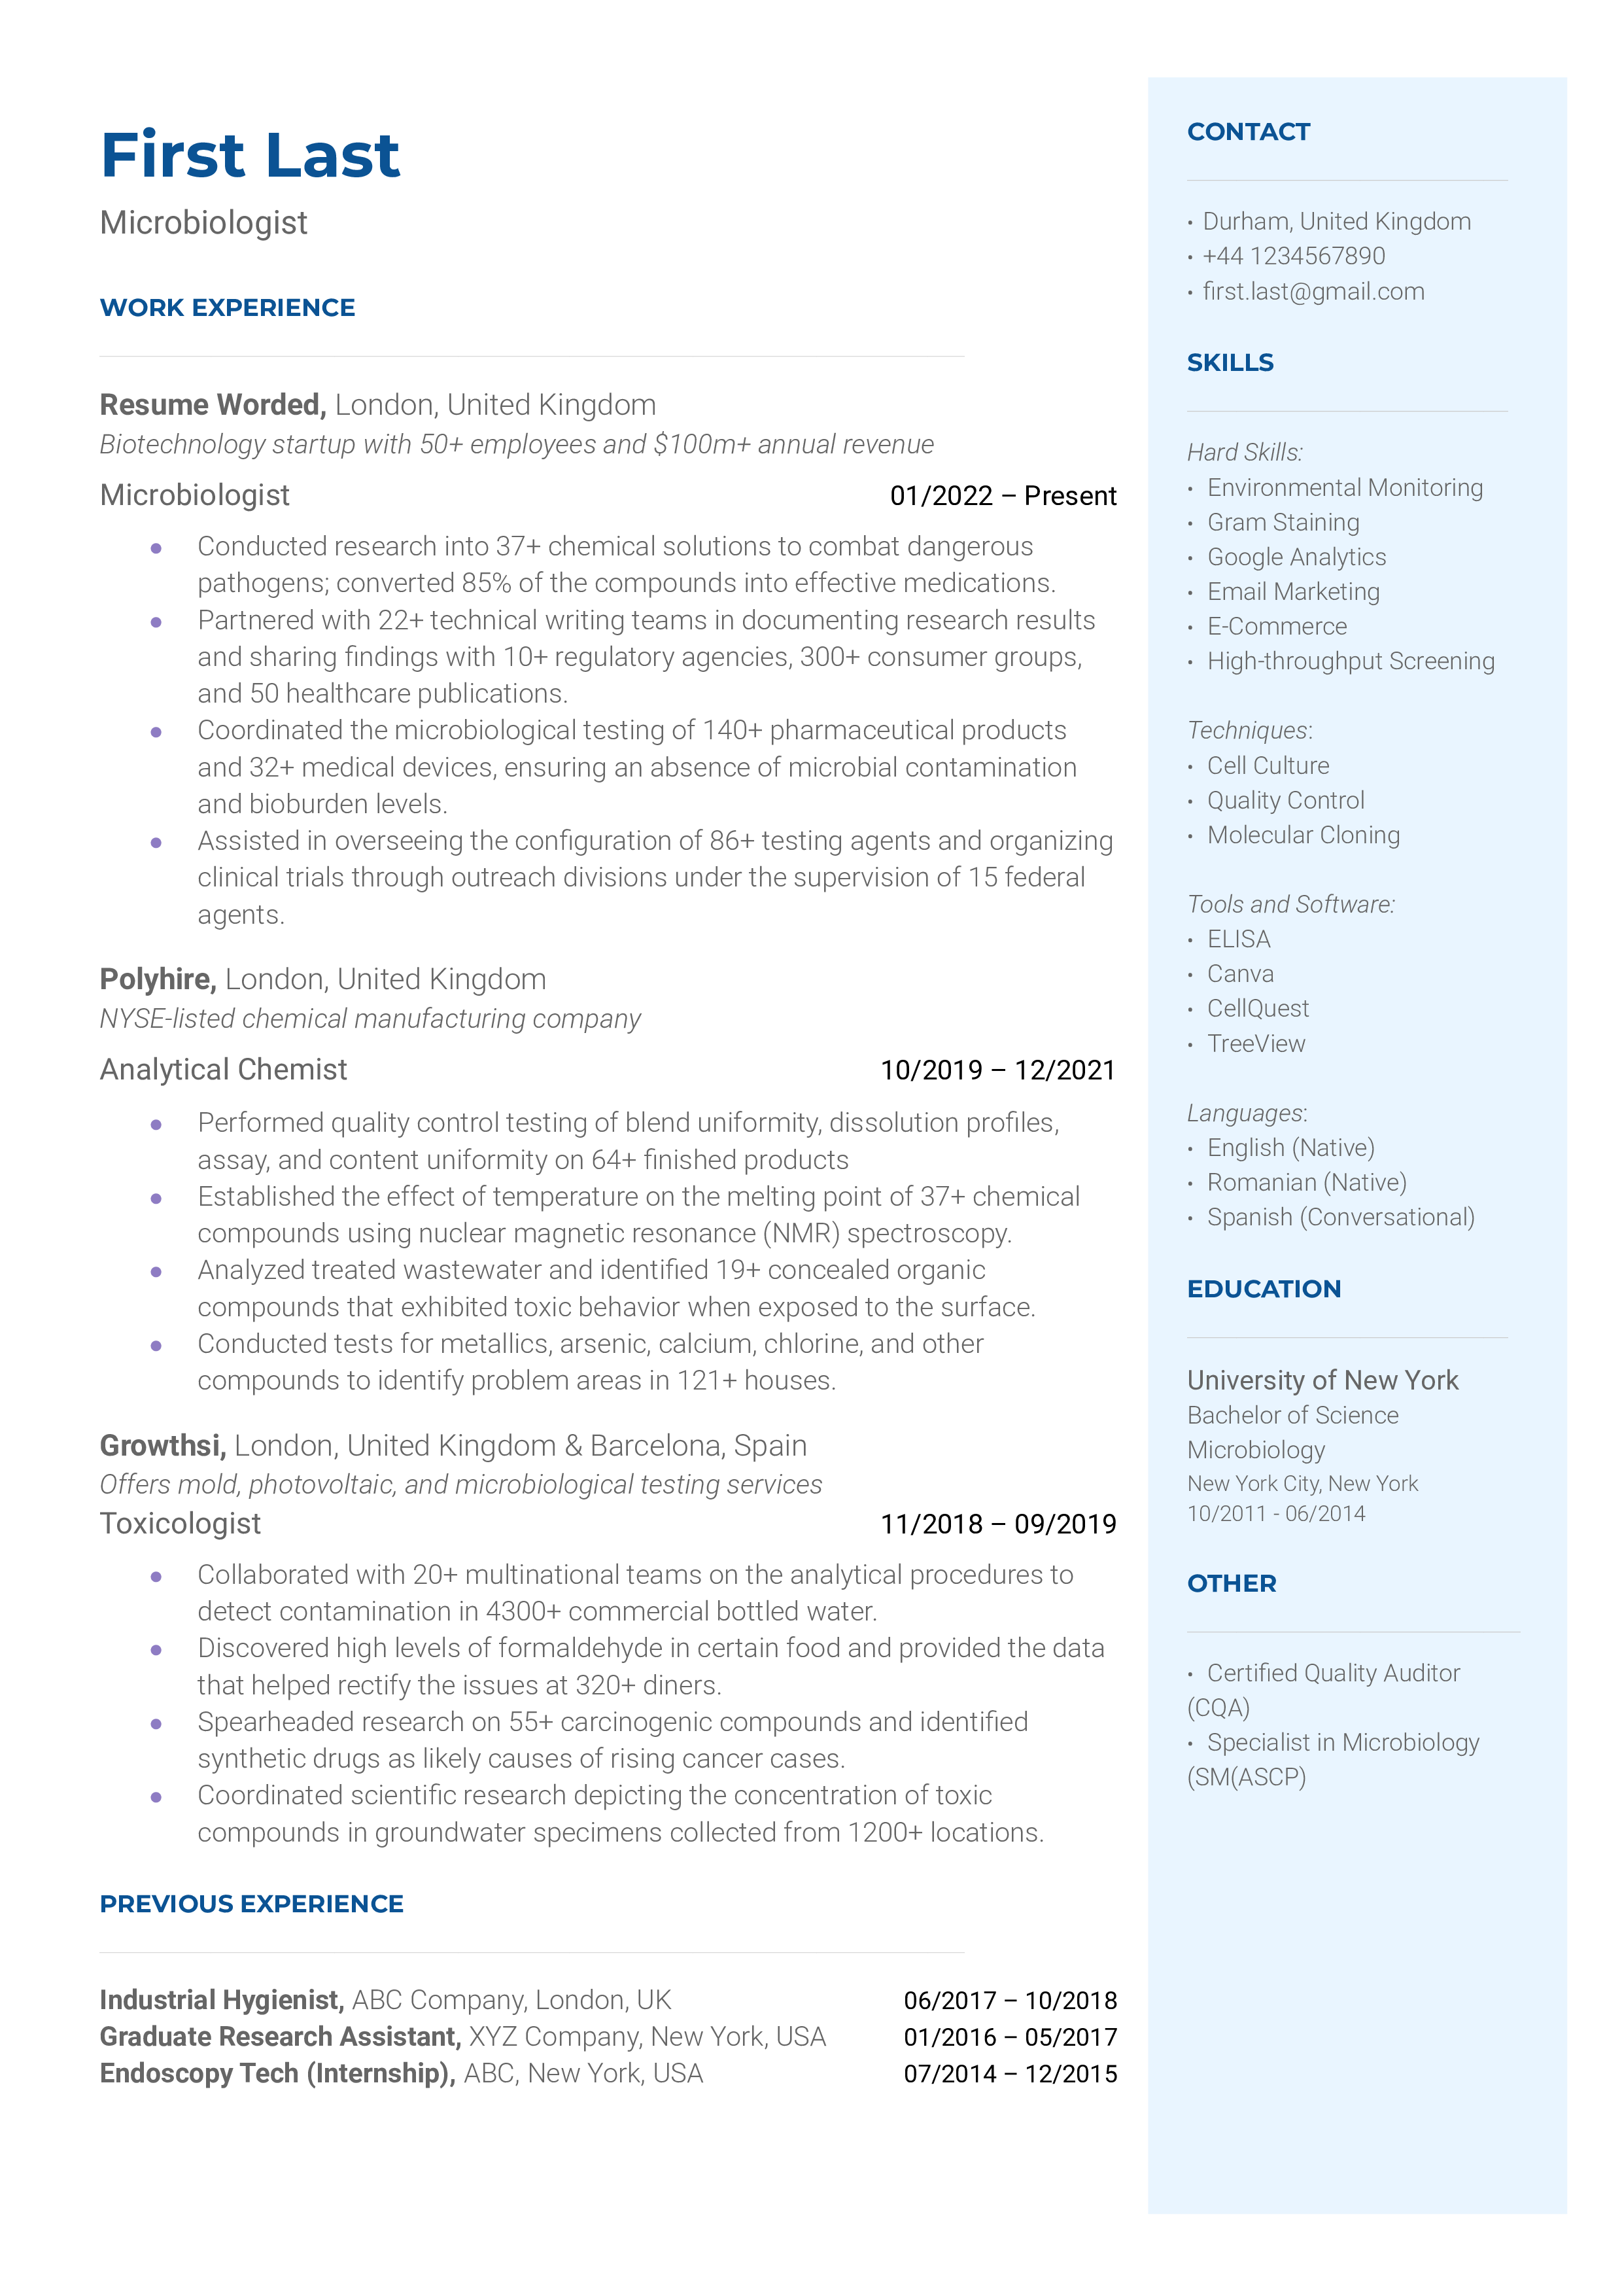 A clinical microbiologist resume template including relevant certifications